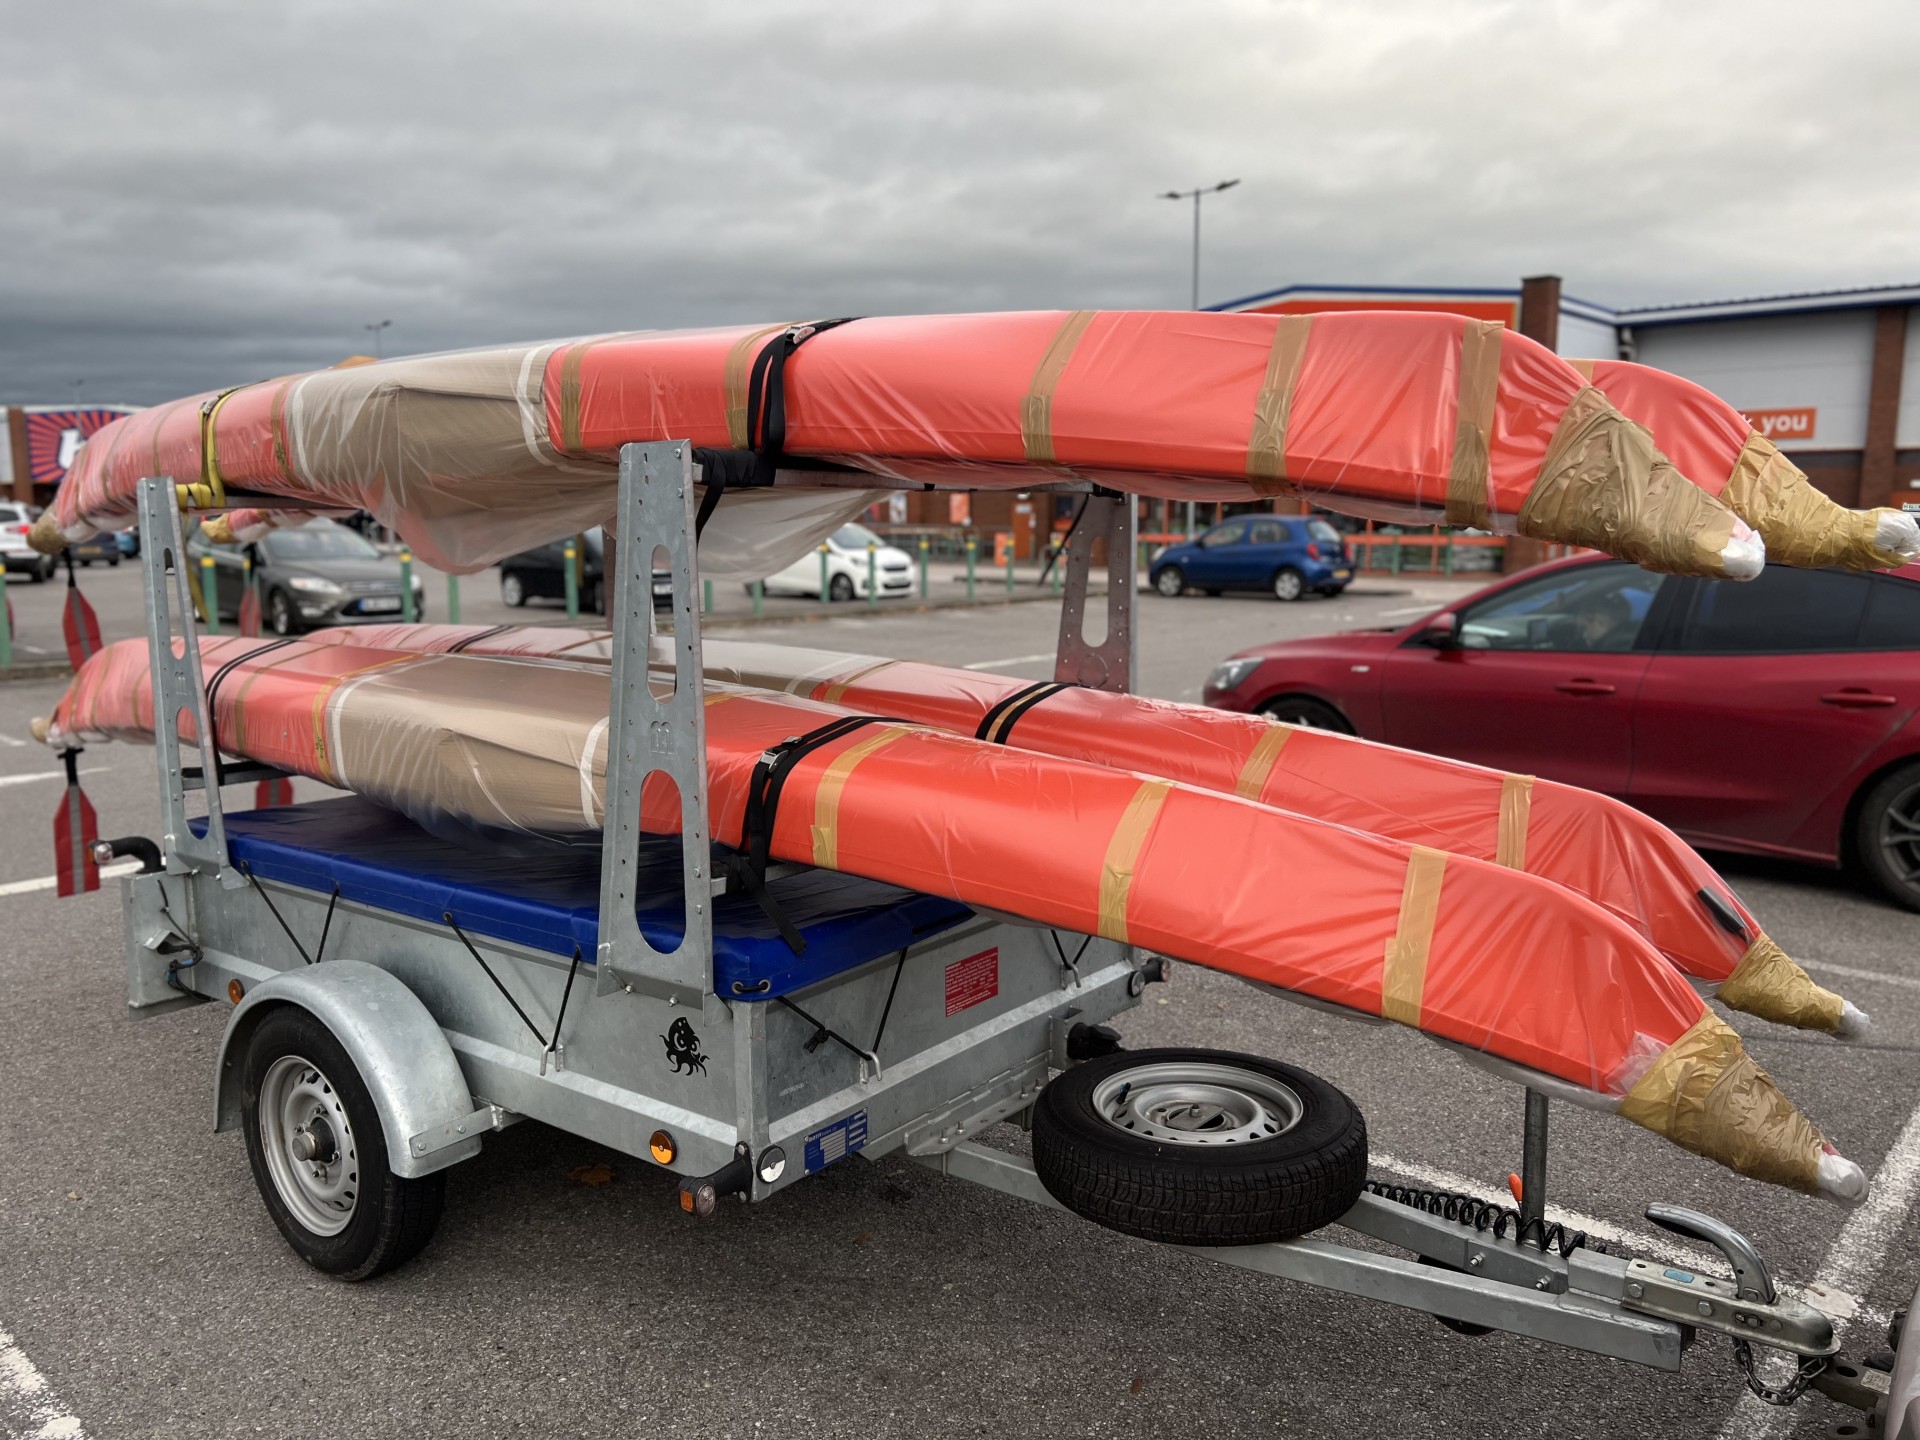 New sea kayaks in packaging being transported by trailer.